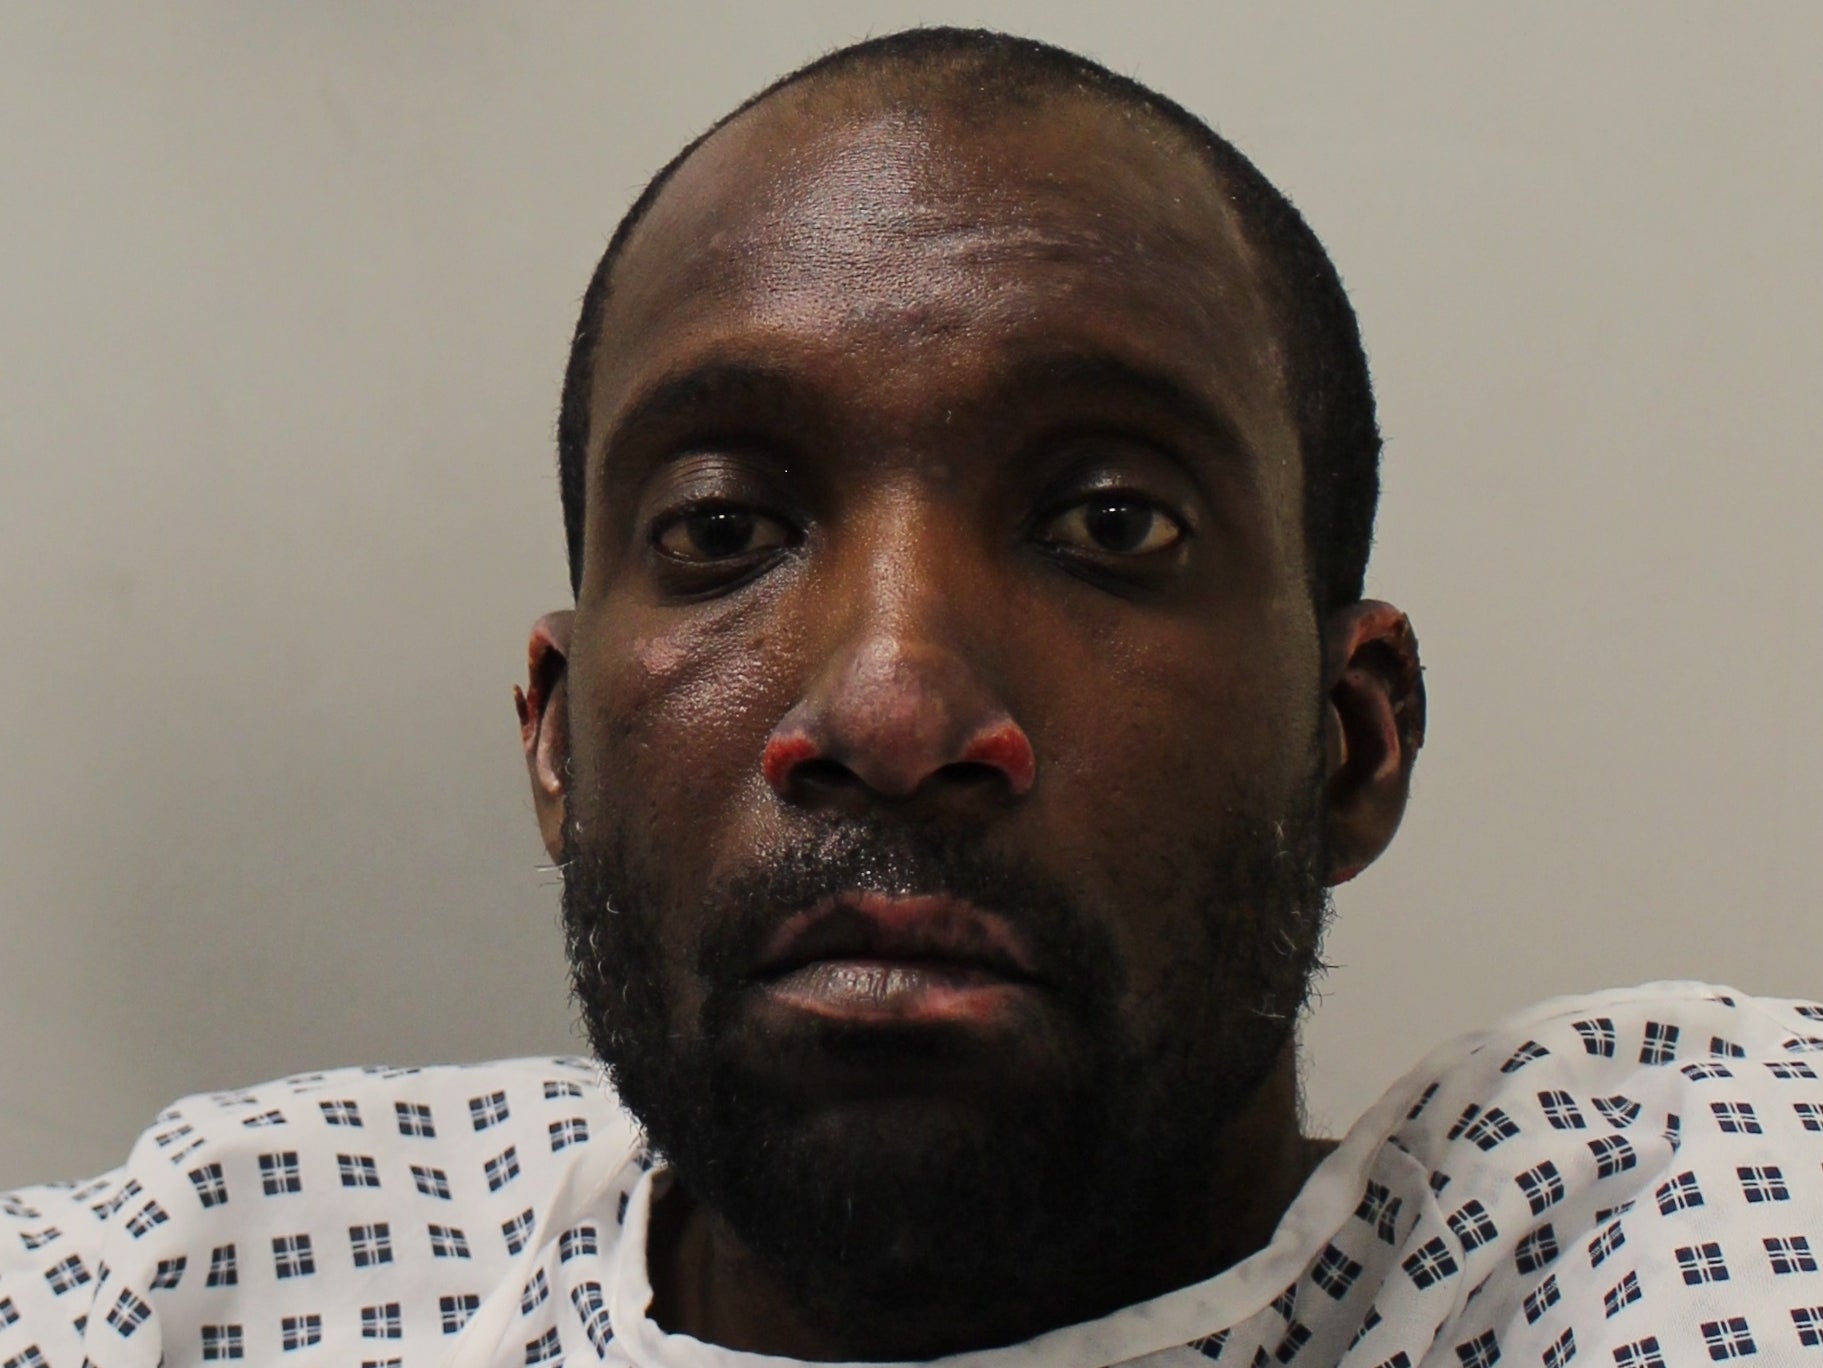 Damion Simmons has been convicted of murdering his estranged wife Denise Keane-Simmons by dousing her in petrol and setting fire to her home in Harlesden, northwest London